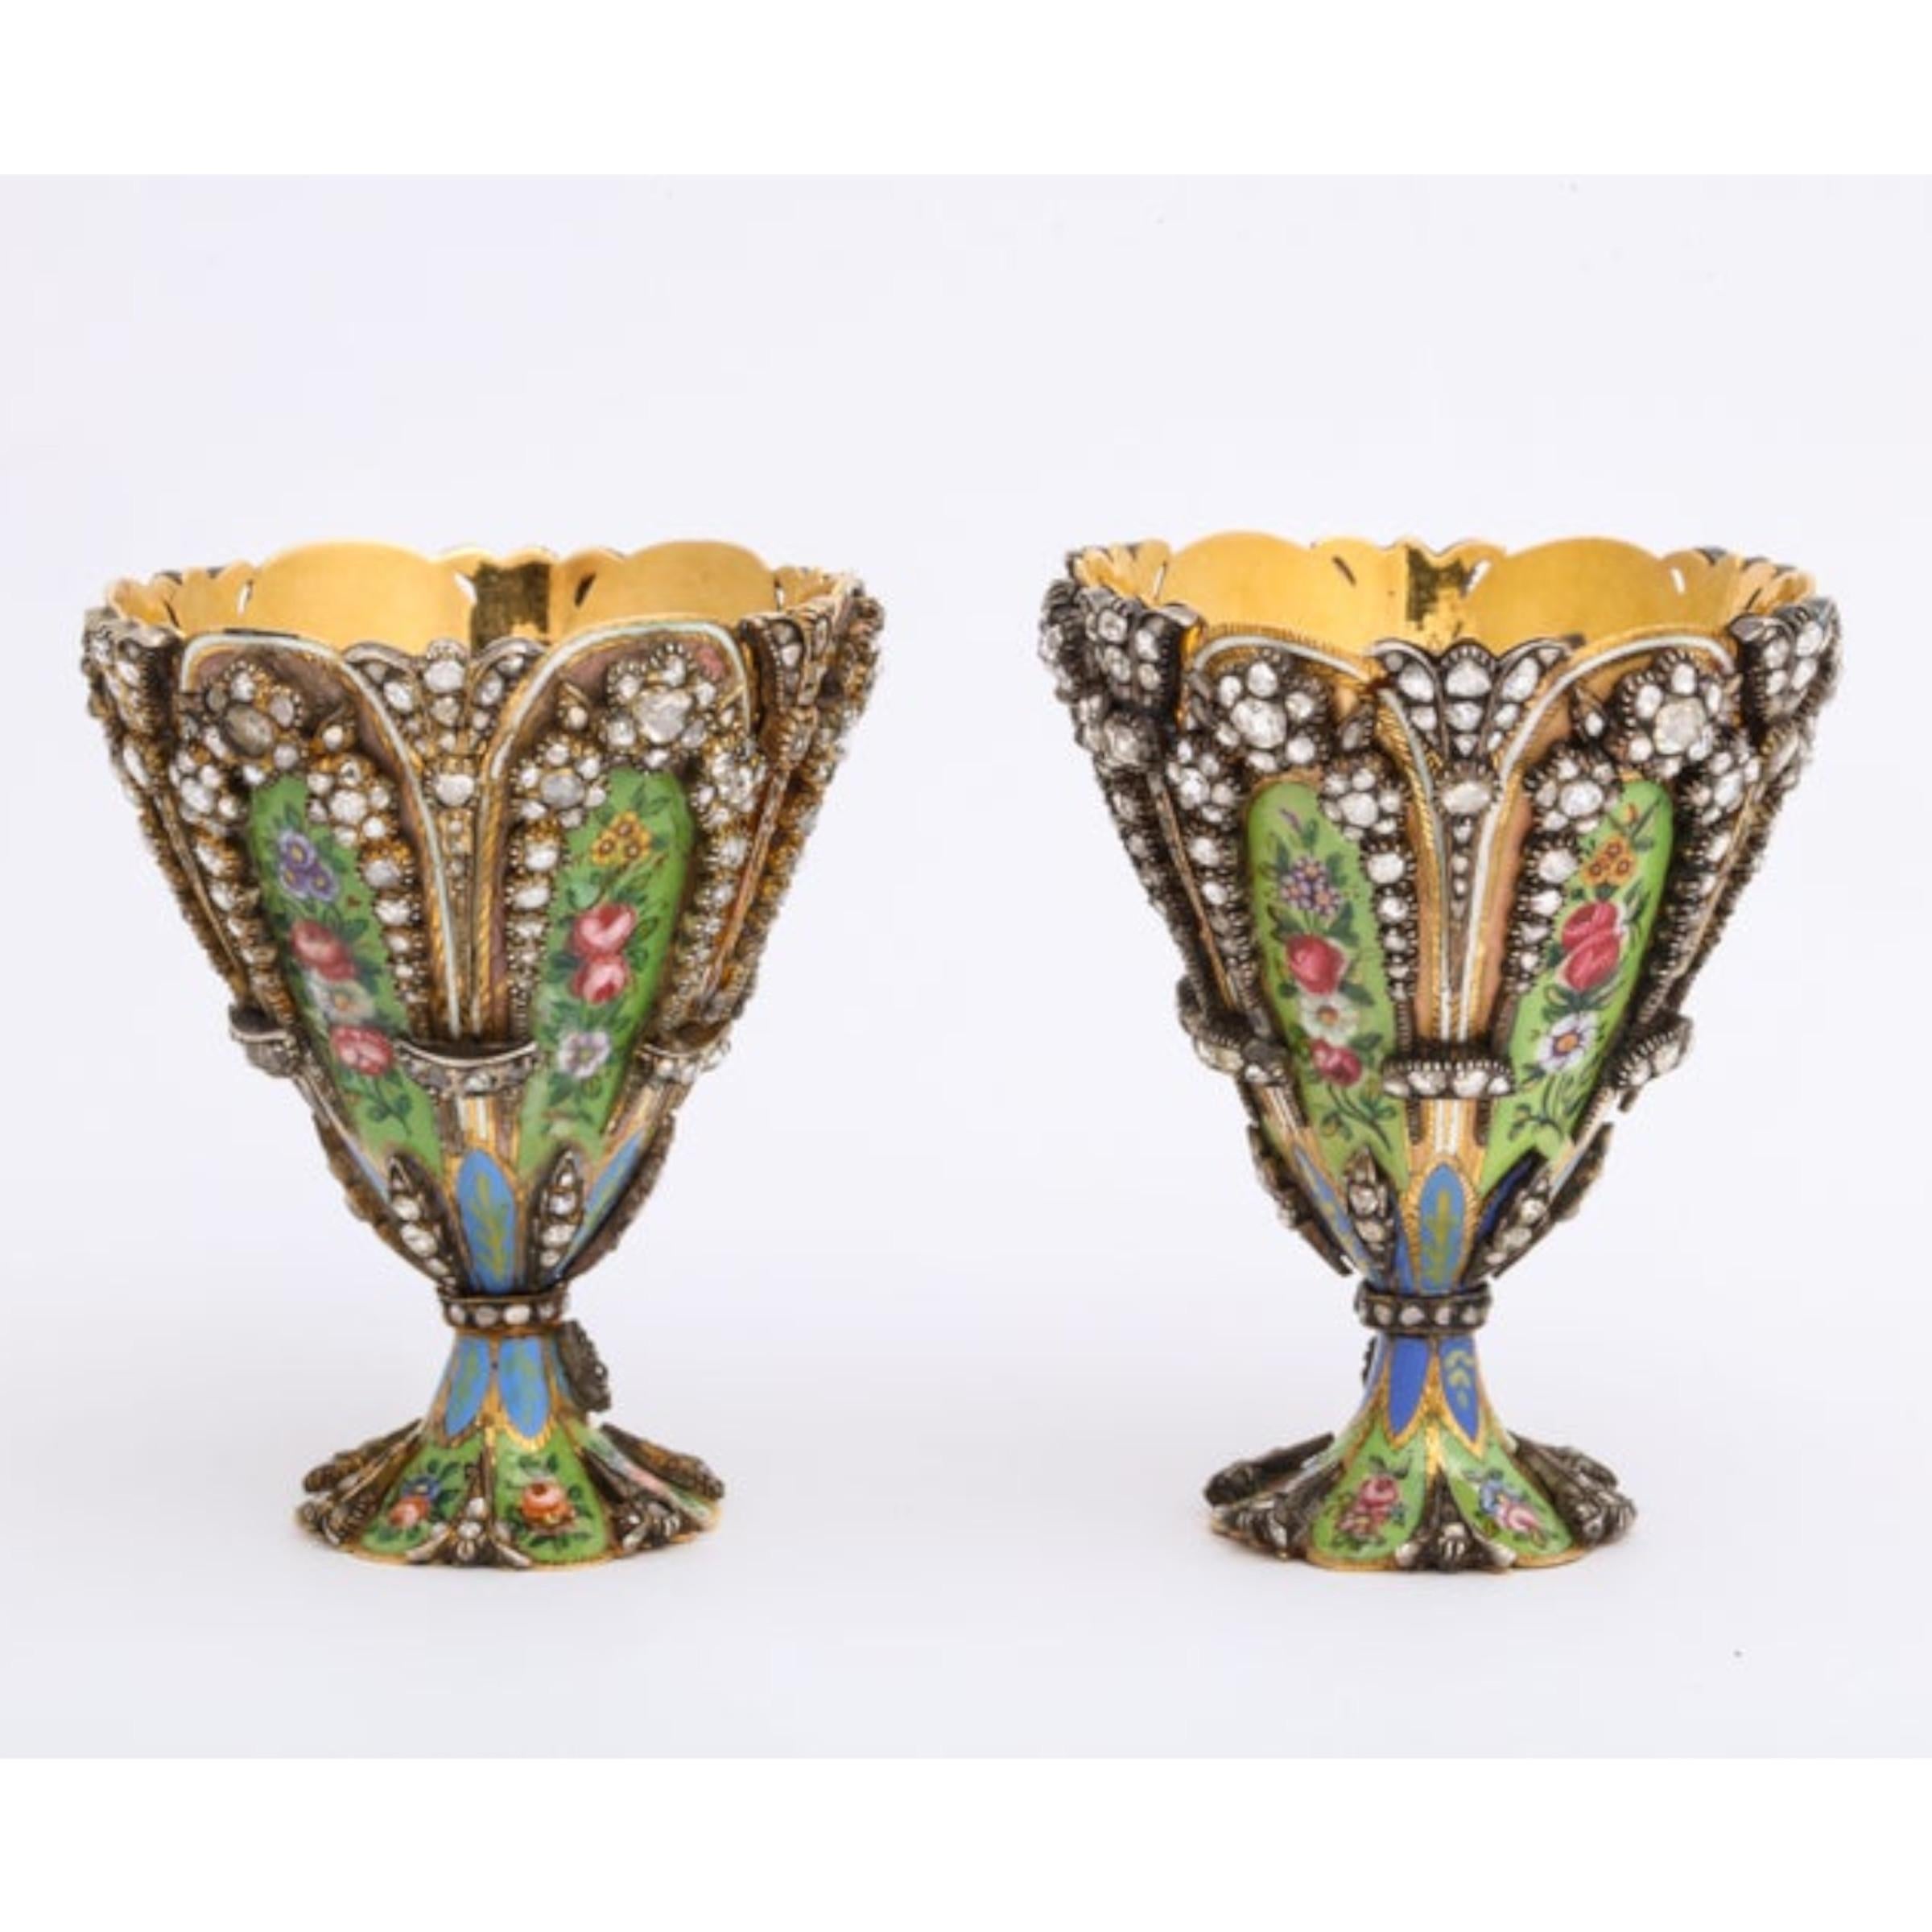 A highly important museum quality pair of diamond and enamel Zarfs.

Each Zarf with a scalloped rim and spreading foot, the sides set with colorful green and pink enamel plaques depicting flower heads and foliage. The stem and the base is a